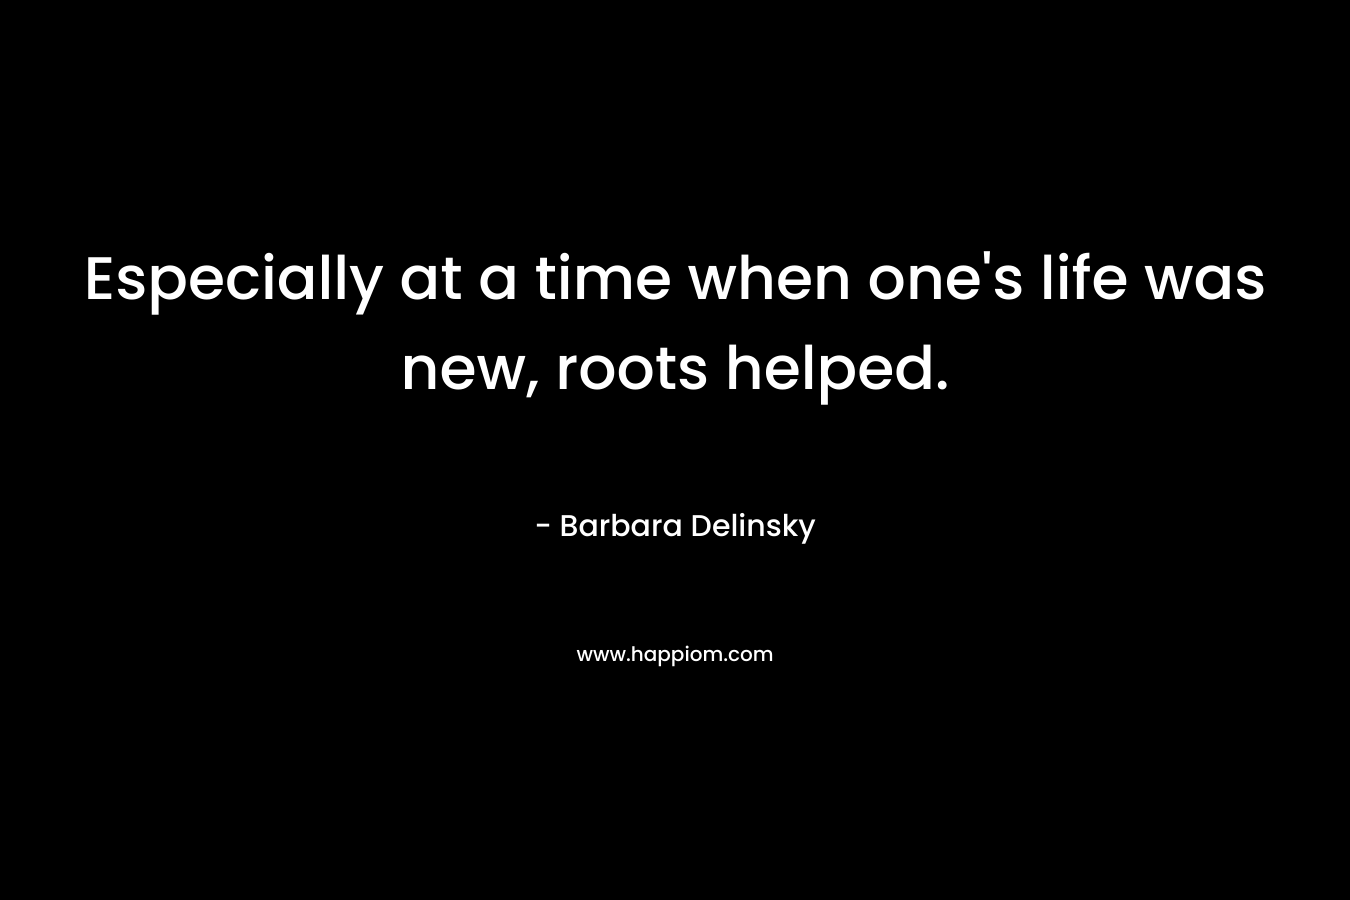 Especially at a time when one’s life was new, roots helped. – Barbara Delinsky